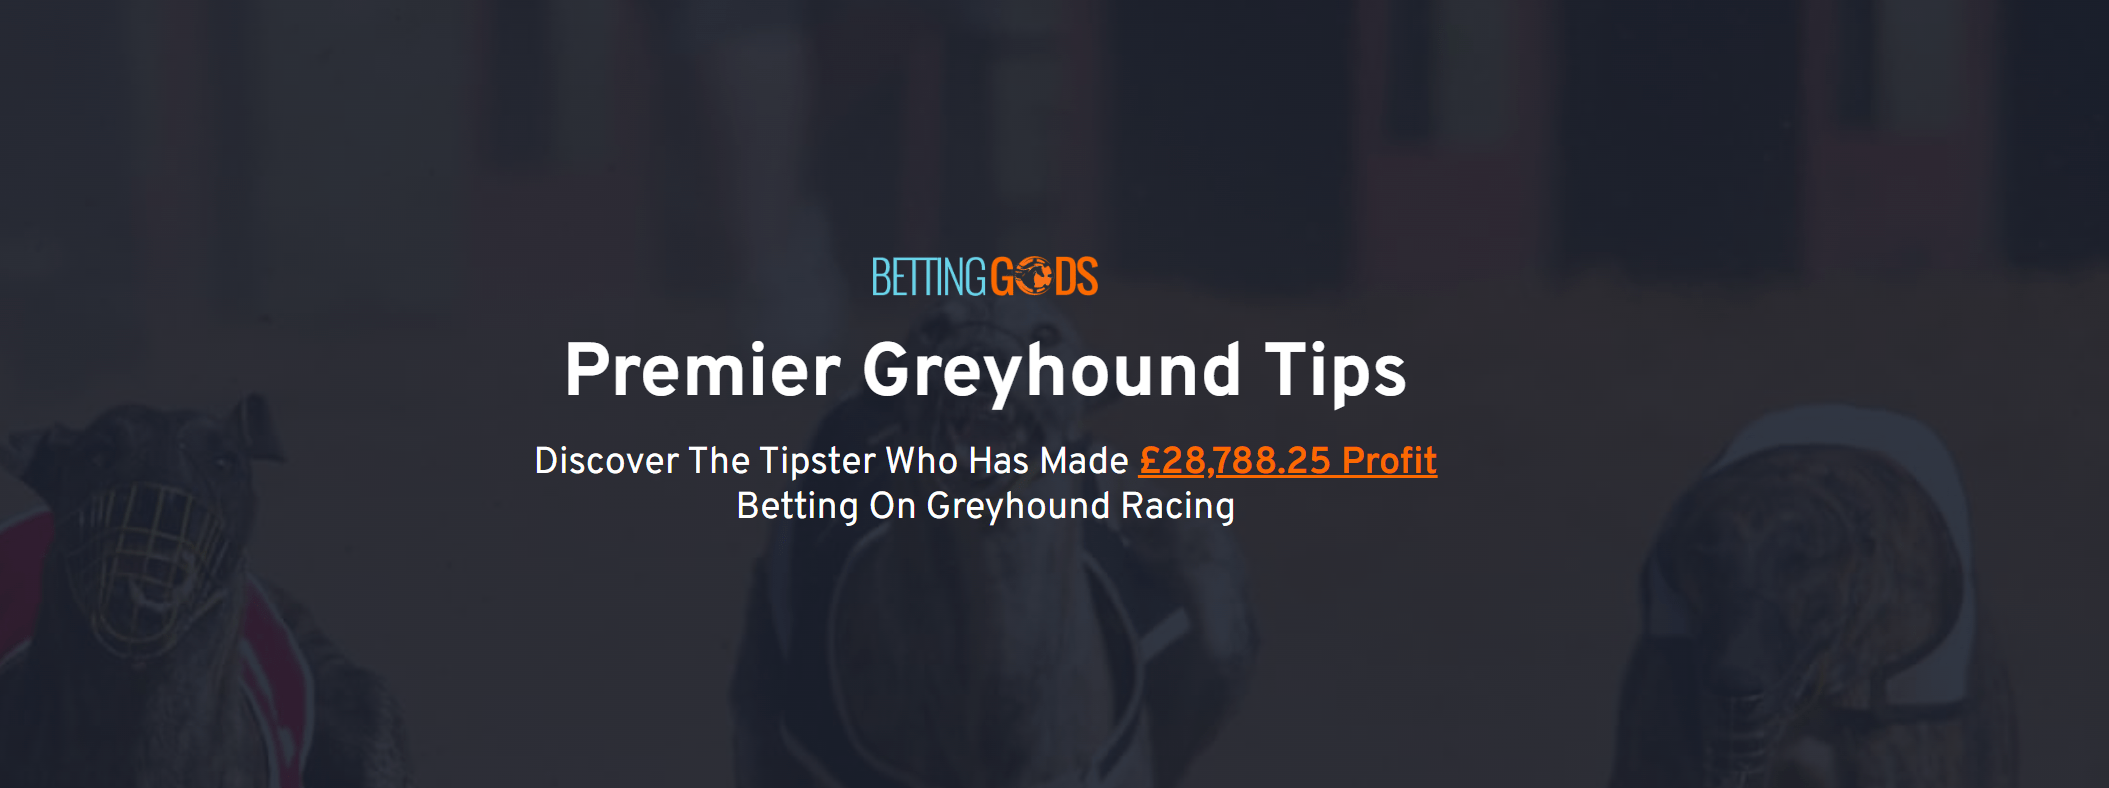 premier greyhound tips review